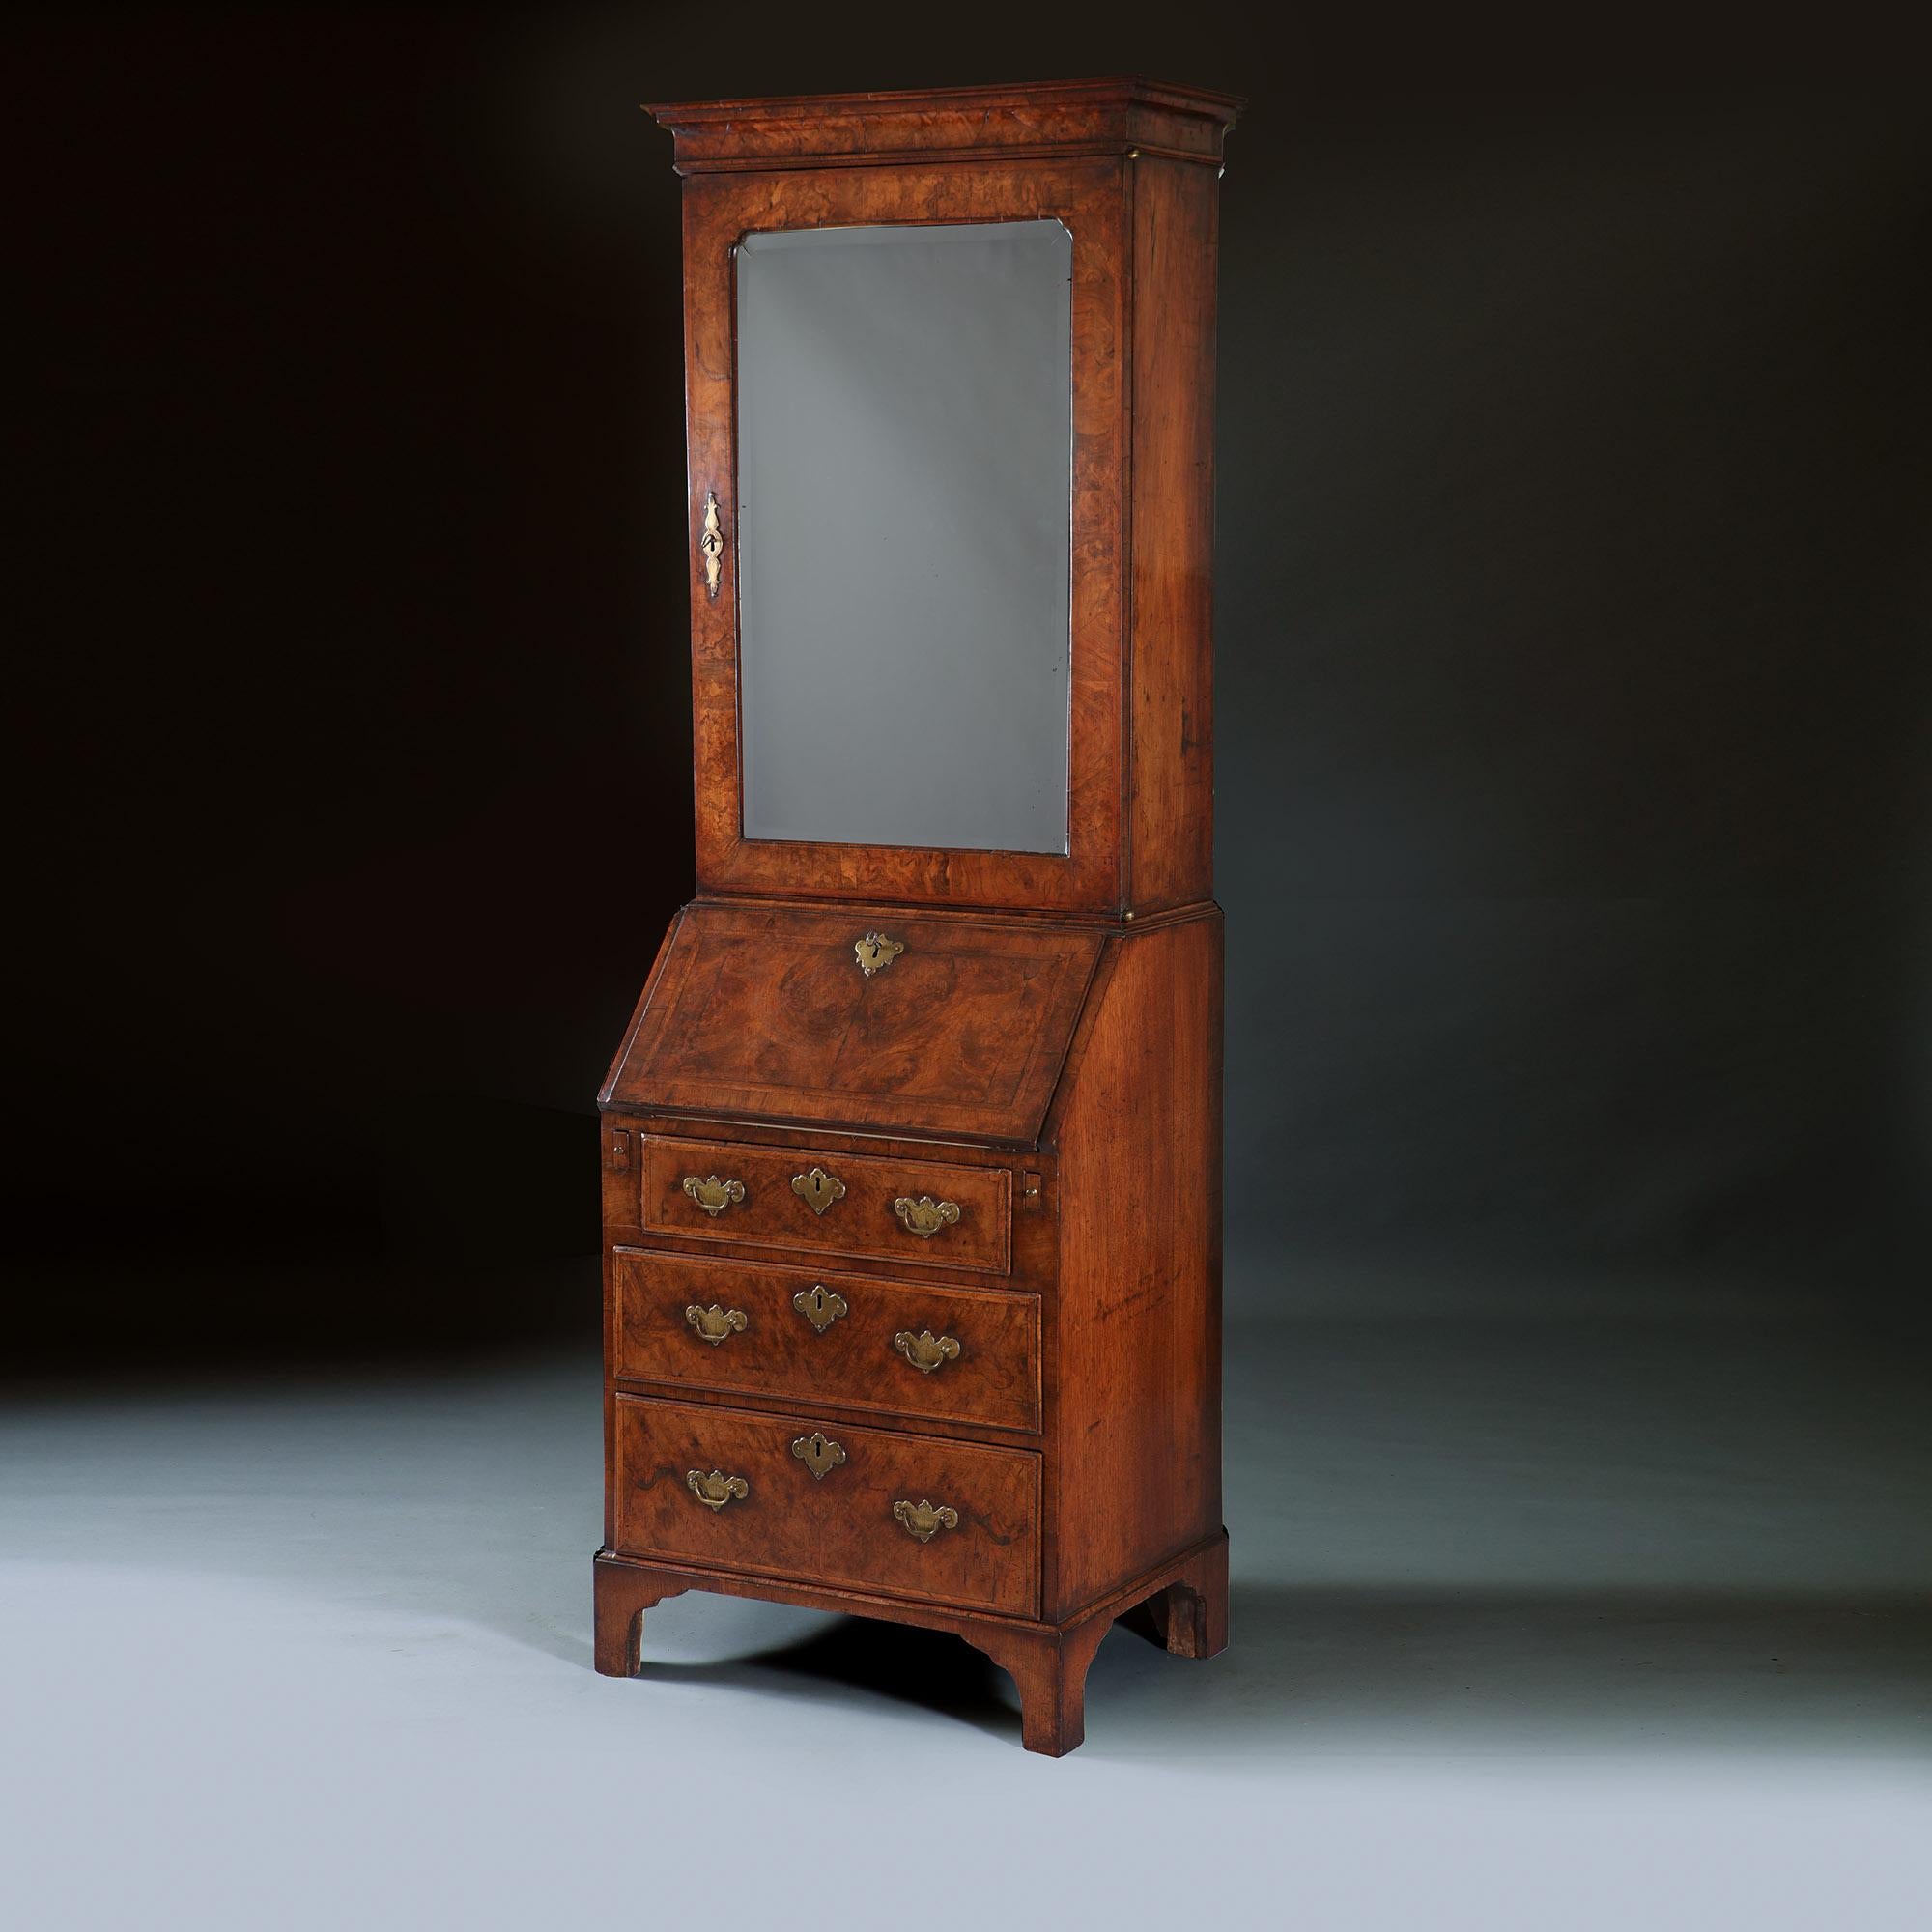 A fine early 18th-century George I burr walnut veneered bureau bookcase of diminutive proportions, circa 1715.

In two parts divided by a cross-grain moulding. The upper section has a cavetto cornice above a large single door inset with a shaped